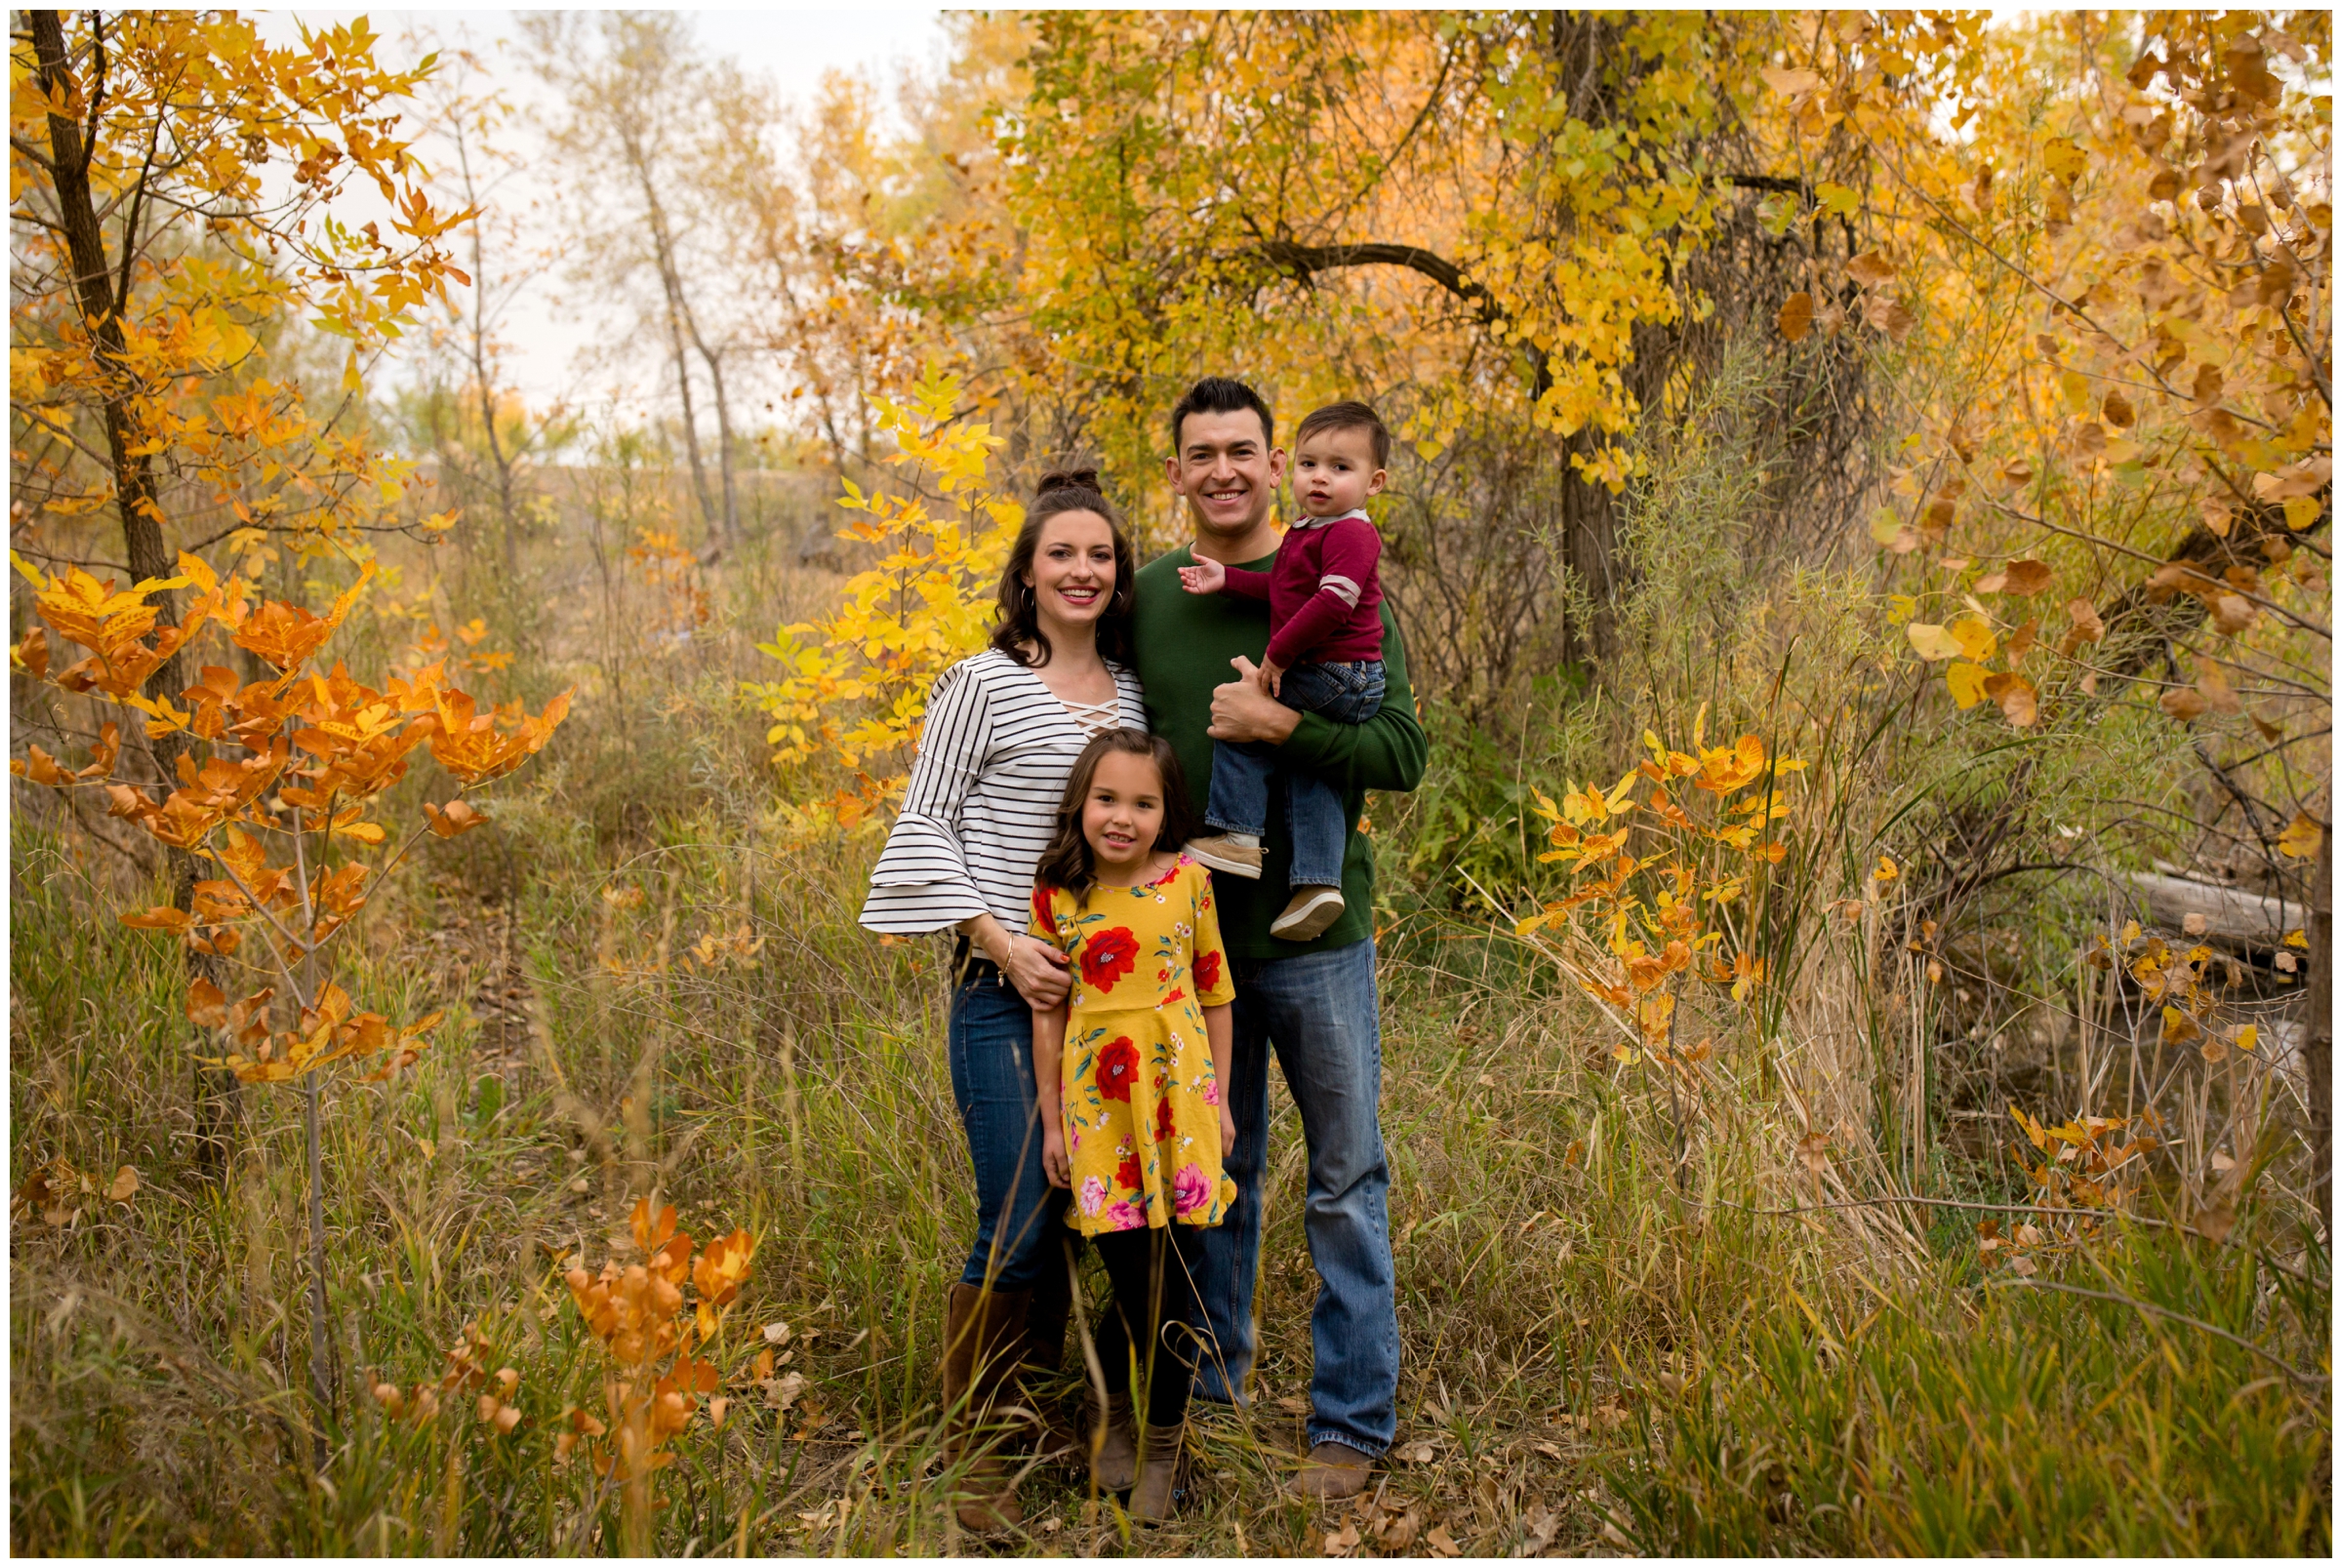 Fort Collins family photos at Riverbend Ponds by Northern Colorado portrait photographer Plum Pretty Photography. Fall Ft. Collins childrens pictures.